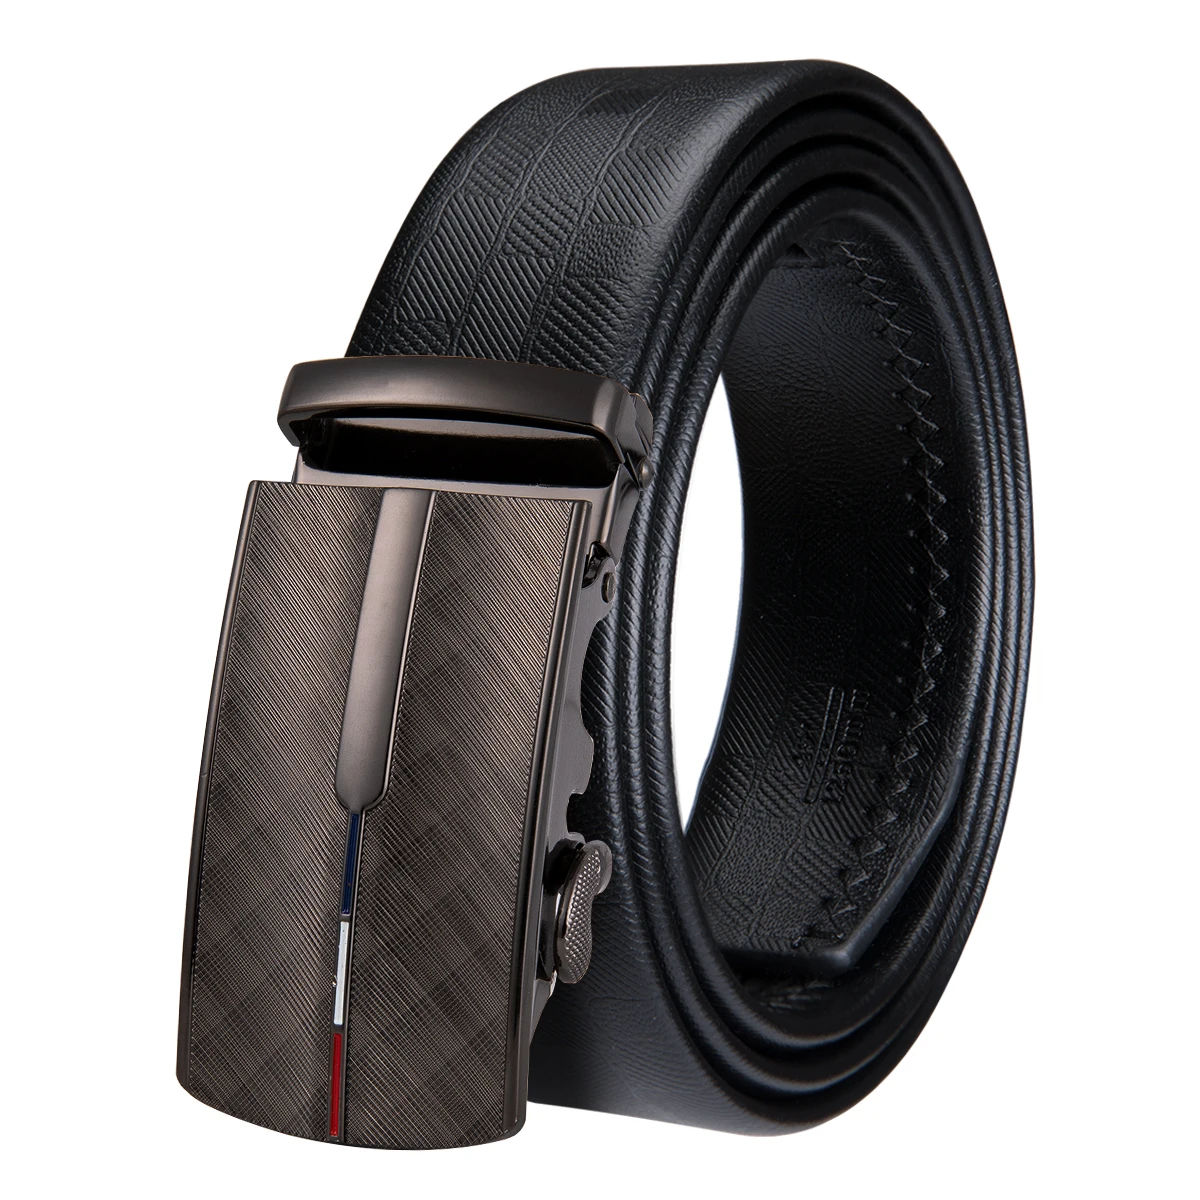 Hi Tie Fashion Male Genuine Leather Belt formal Style Black Leather Automatic Buckle Belts for ...